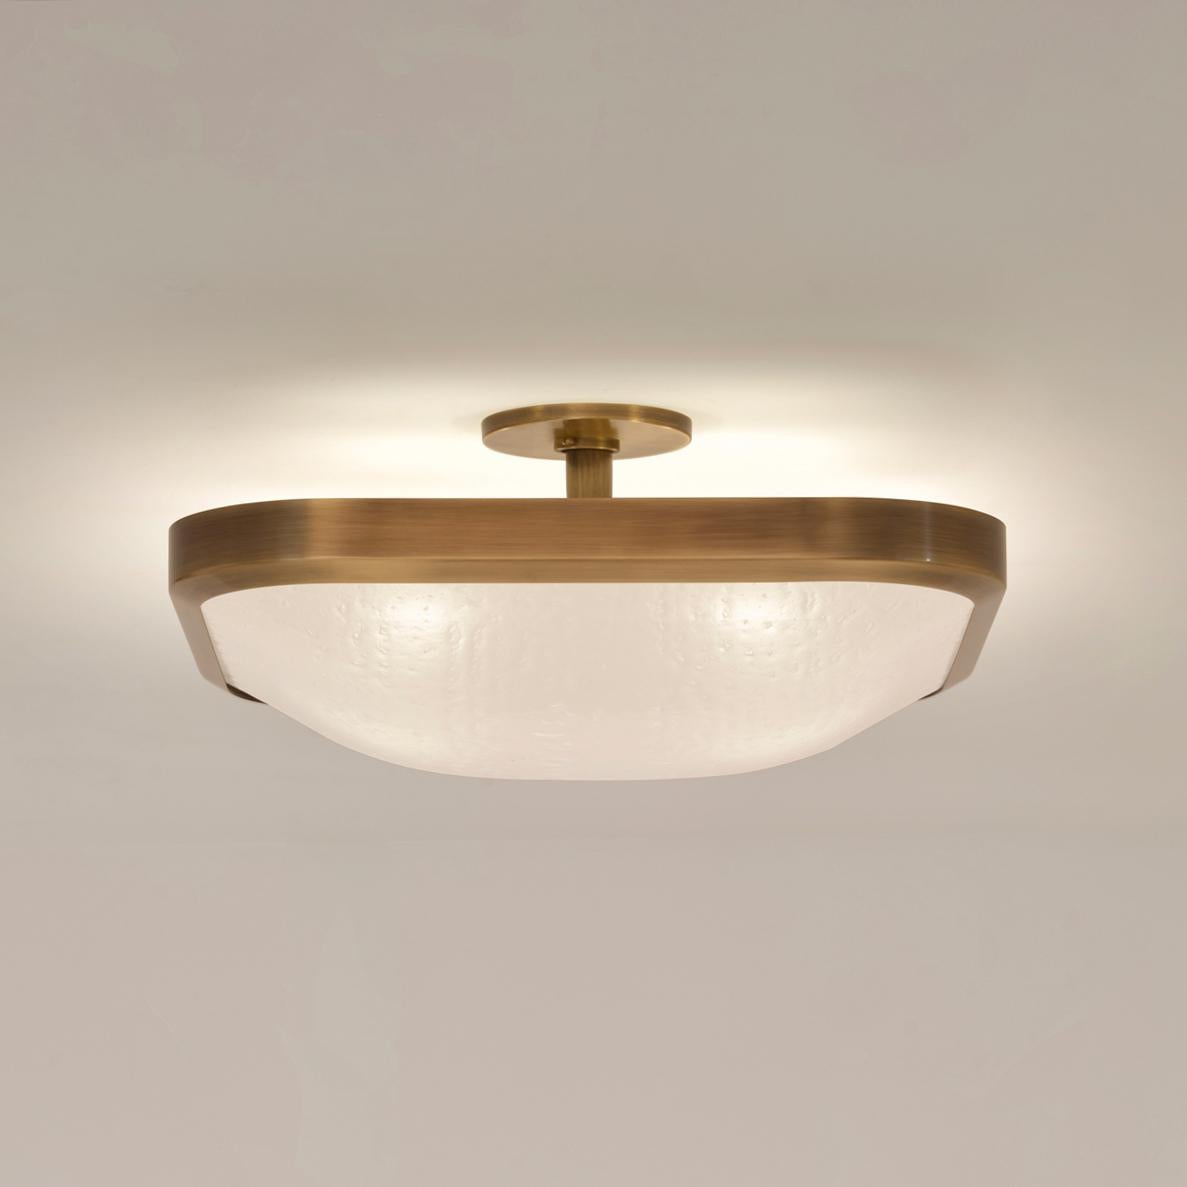 Italian Uno Square Ceiling Light by Gaspare Asaro-Polished Nickel Finish For Sale